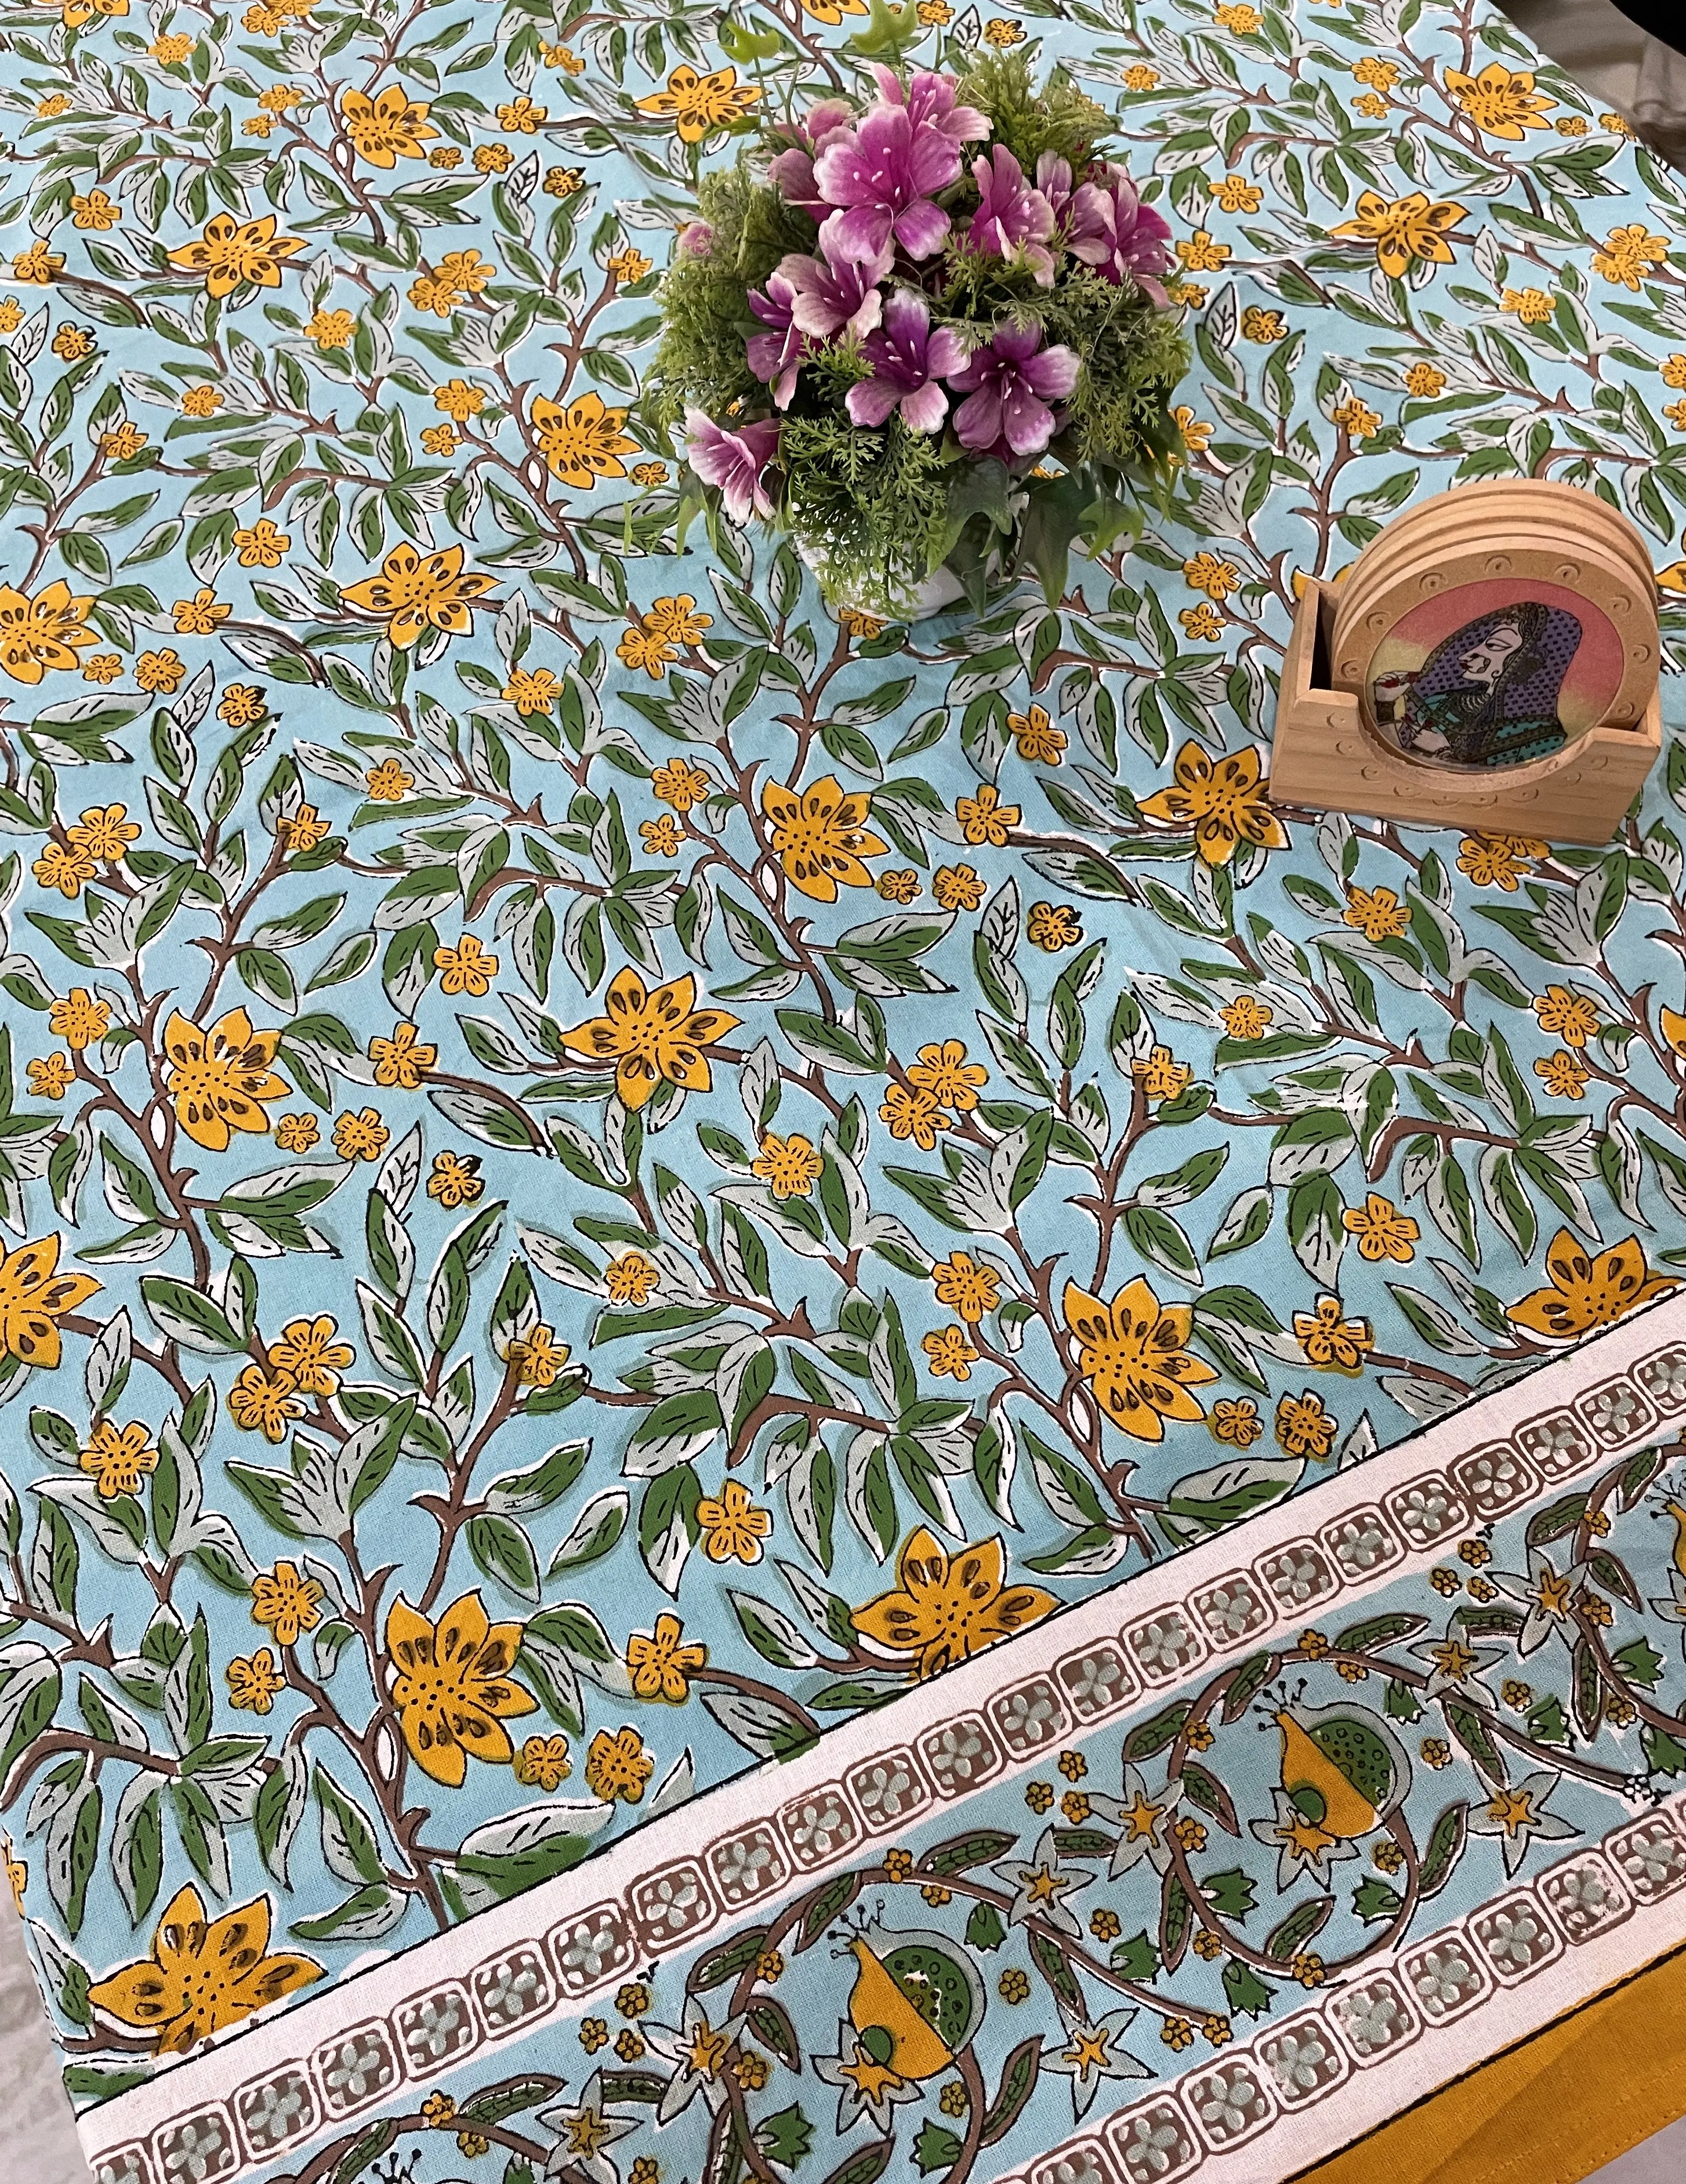 Indian Block Print Cotton Tablecloth, Floral Table Cloth for Dinning Table, Turquoise and Green Color Tablecloth and Bedspread.